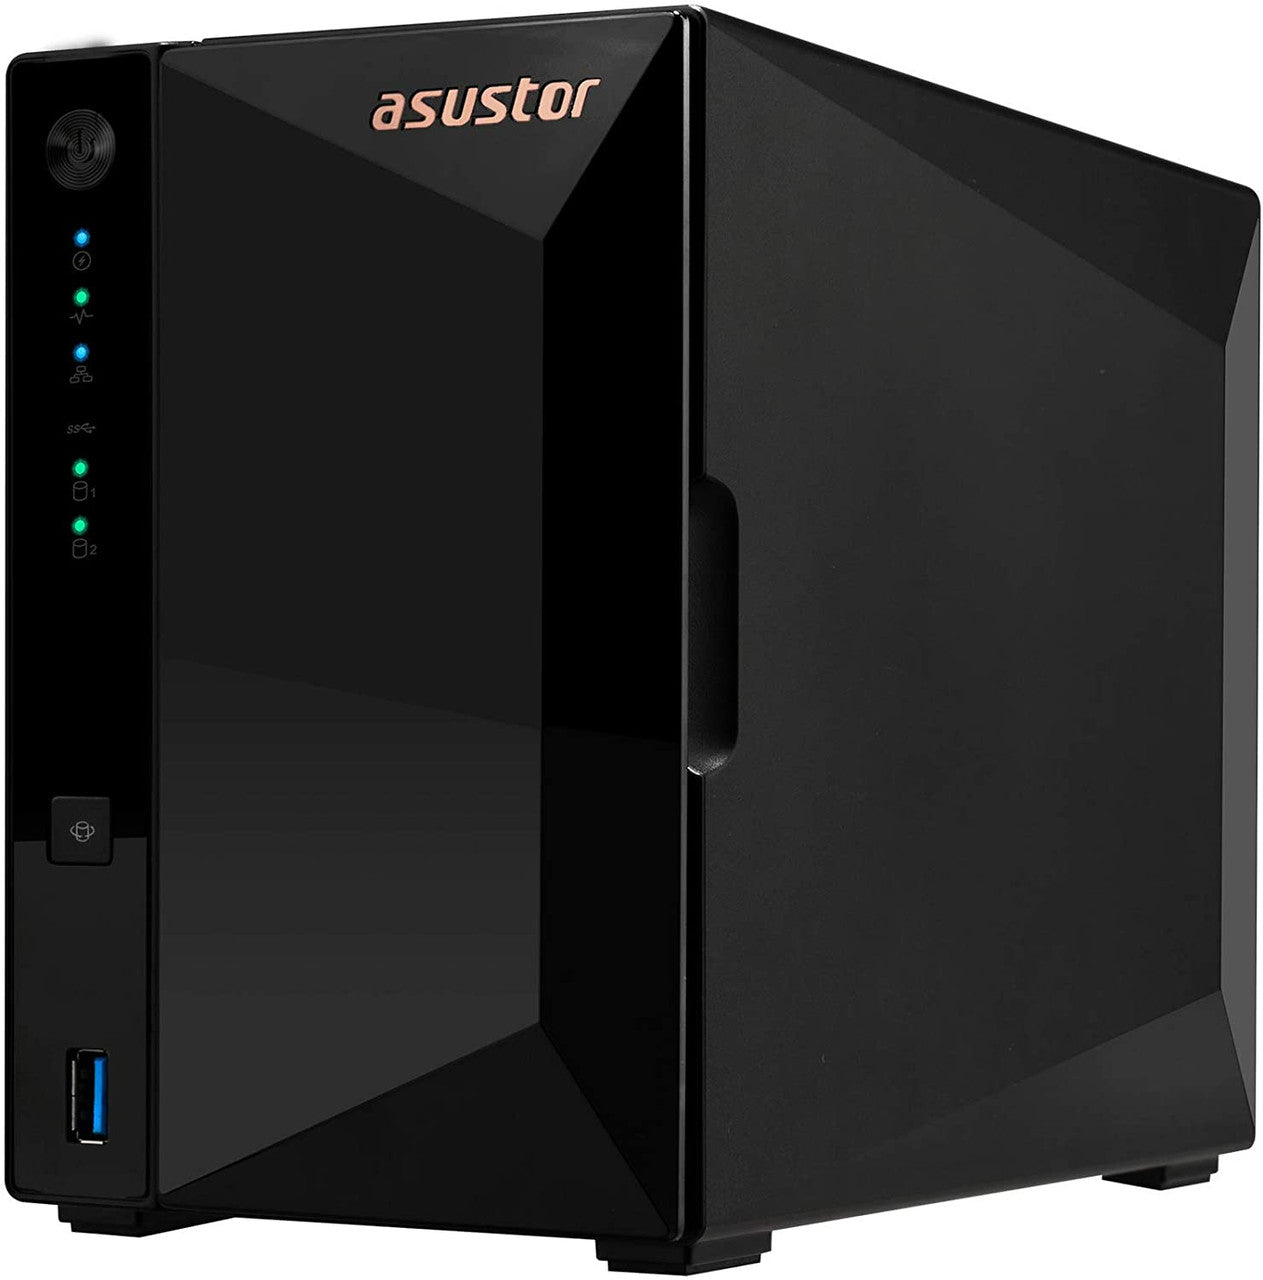 Asustor AS3302T 2-Bay Drivestor 2 PRO NAS with 2GB RAM and 24TB (2x12TB) Western Digital RED Plus Drives Fully Assembled and Tested